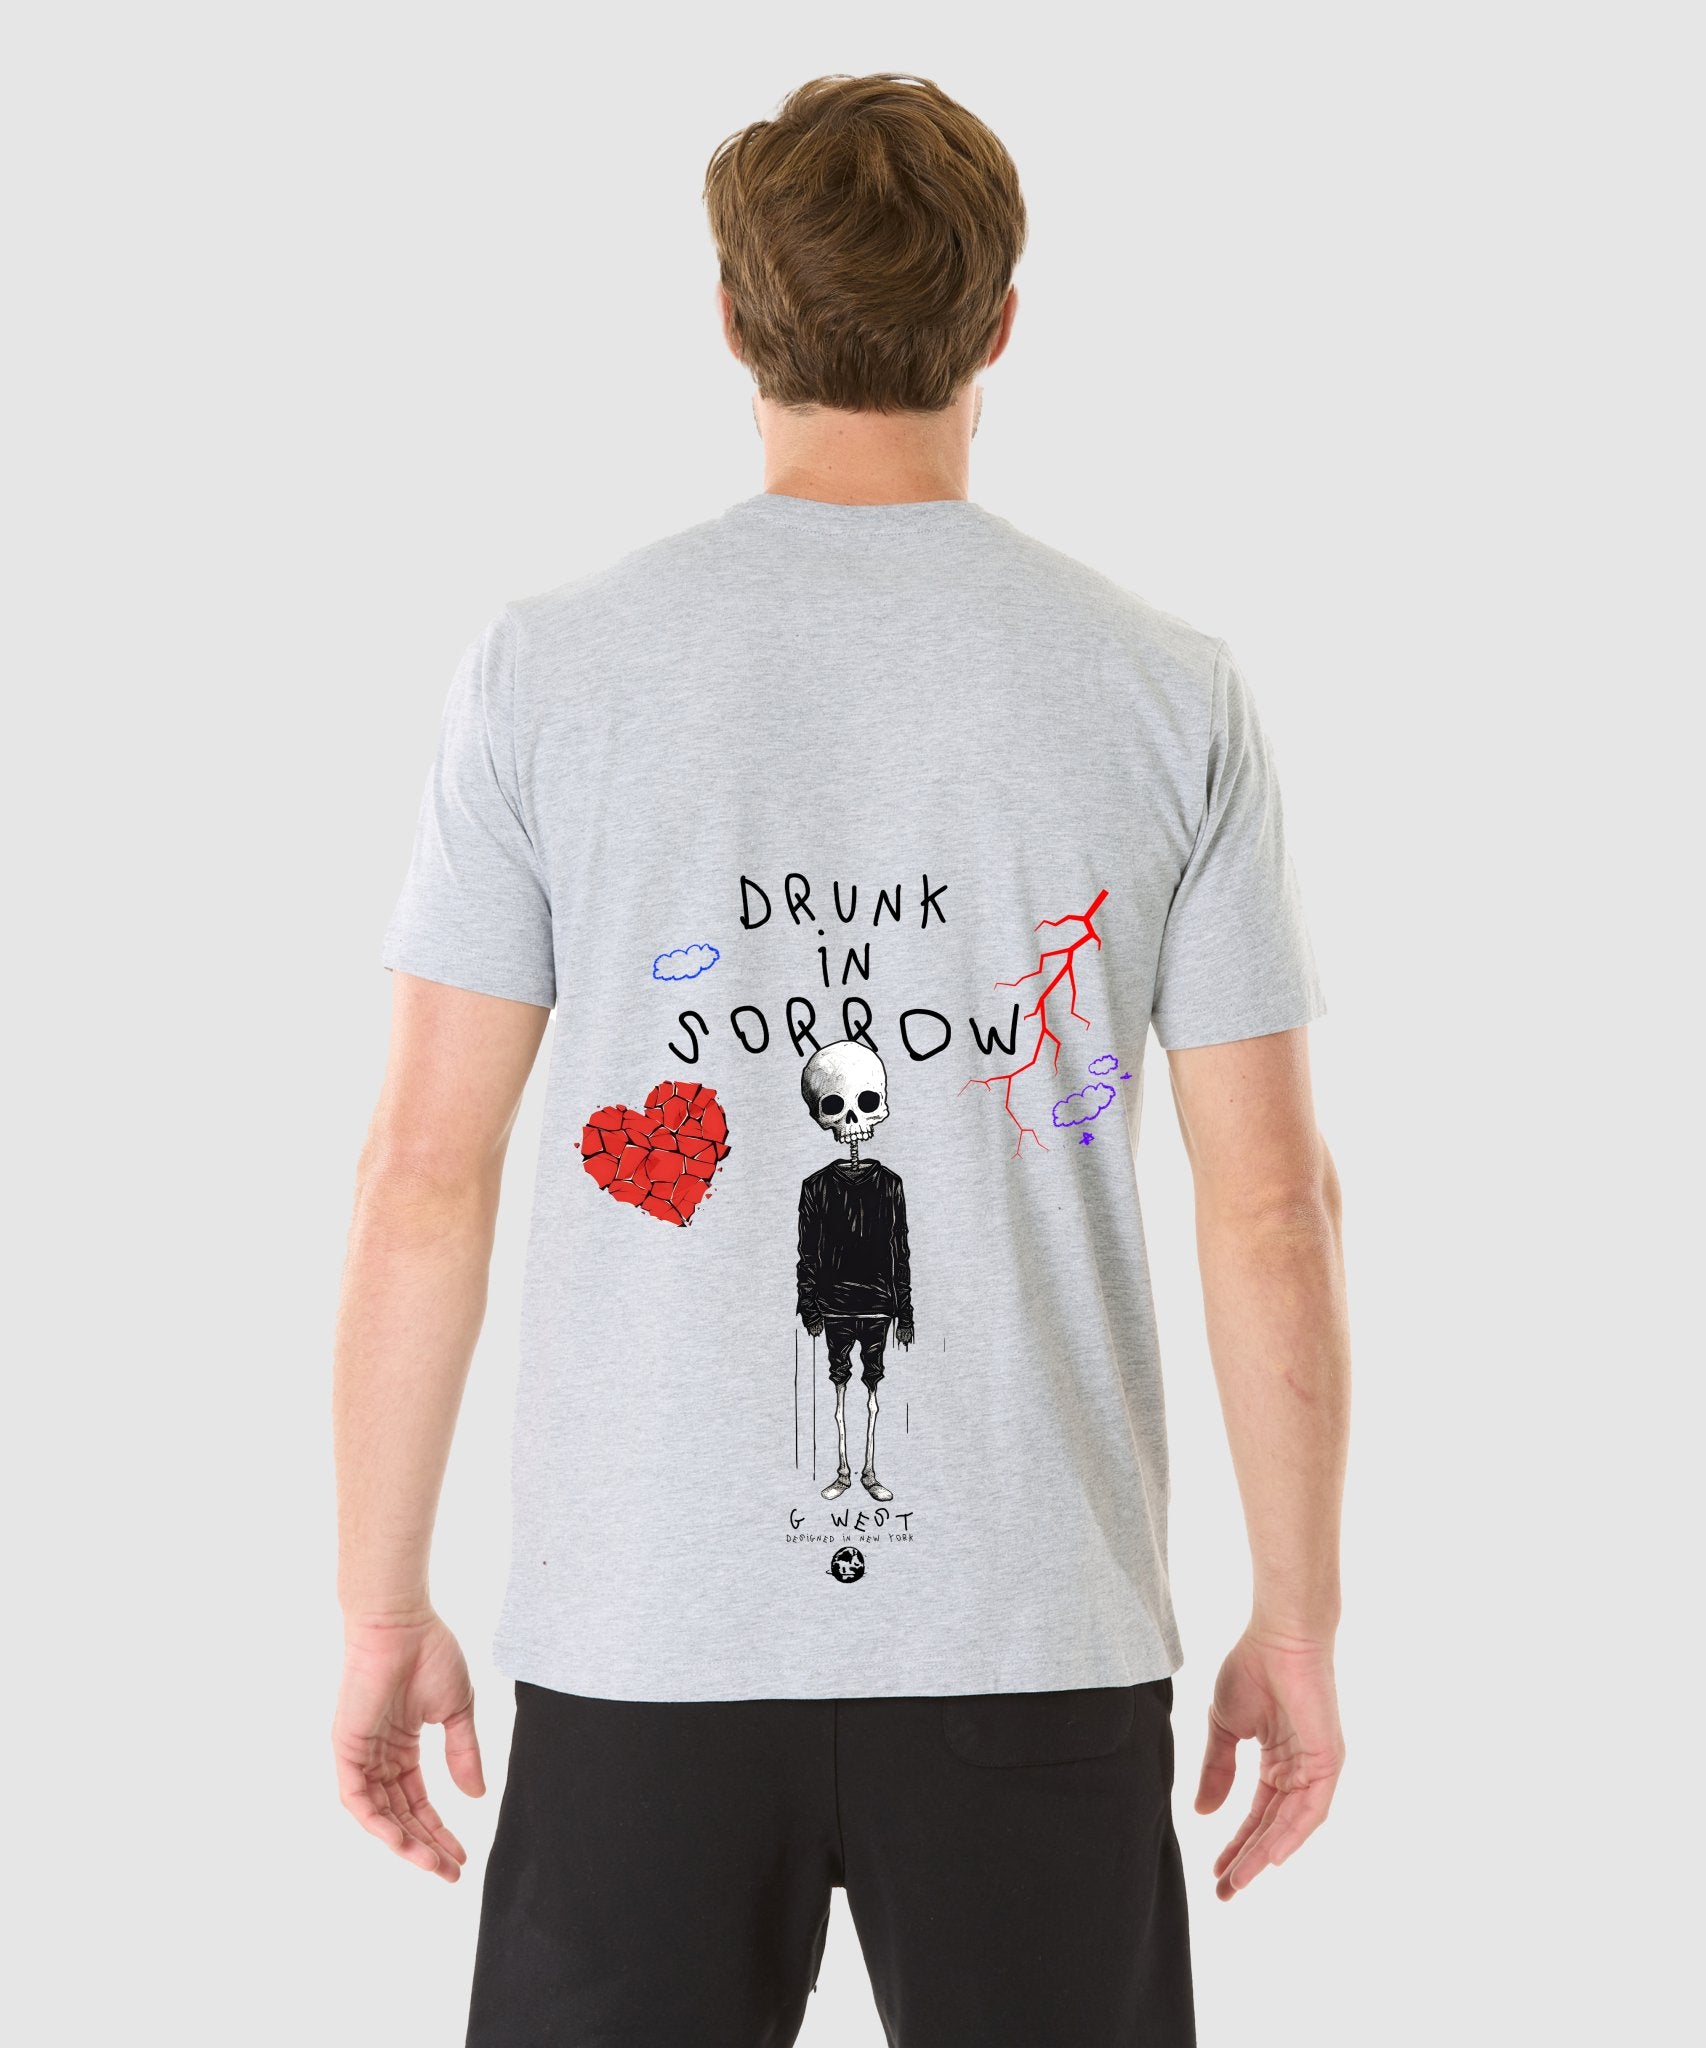 G WEST DRUNK IN SORROW T-SHIRT - 12 COLORS